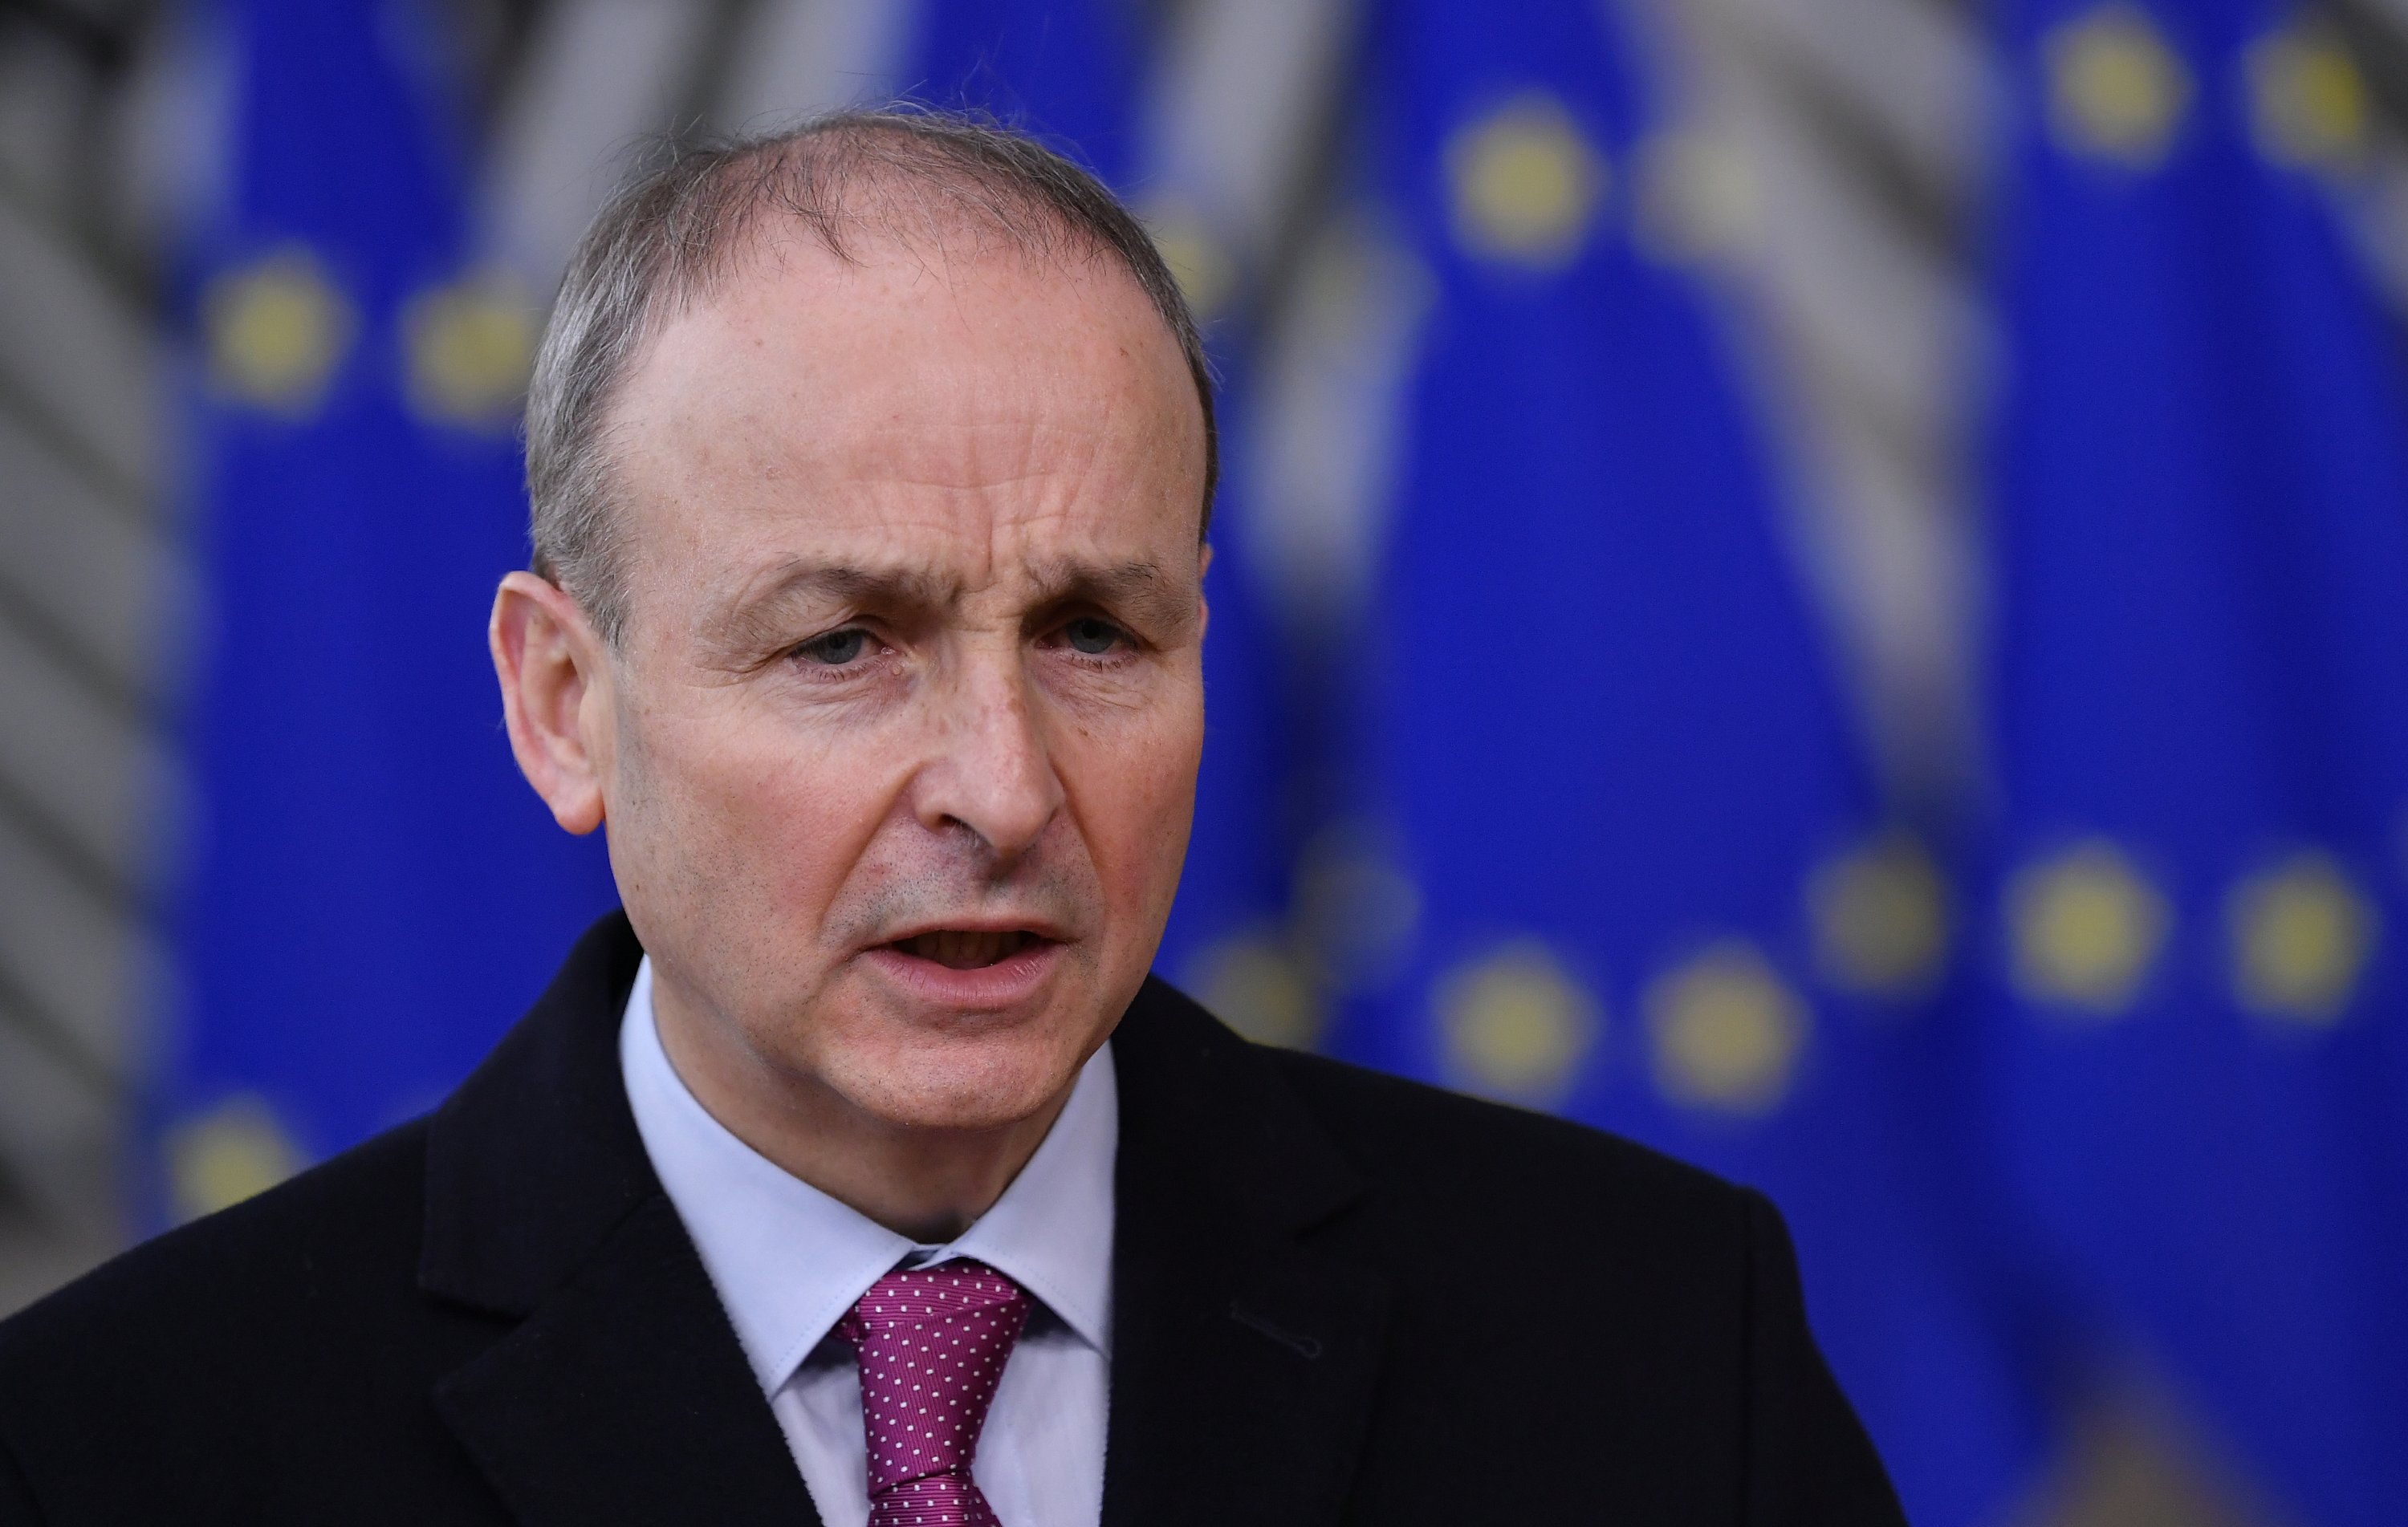 Irish Prime Minister says’ perverse ‘morality has driven unmarried mothers’ homes